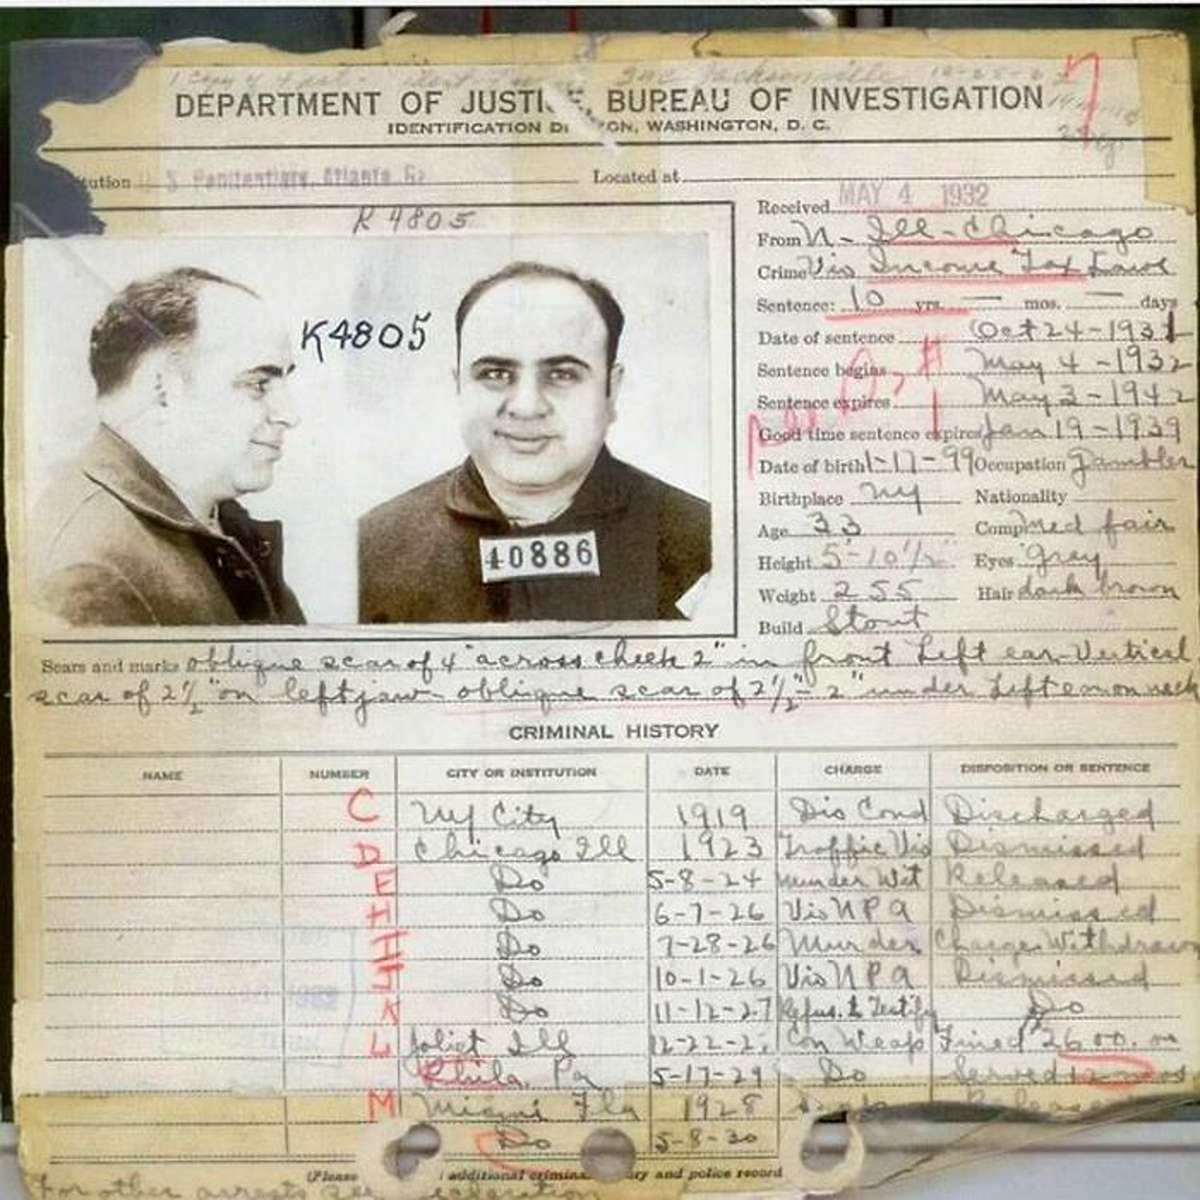 (1932) Al Capone's FBI Criminal Record, Showing Most Of His Criminal Charges Which Were Dismissed